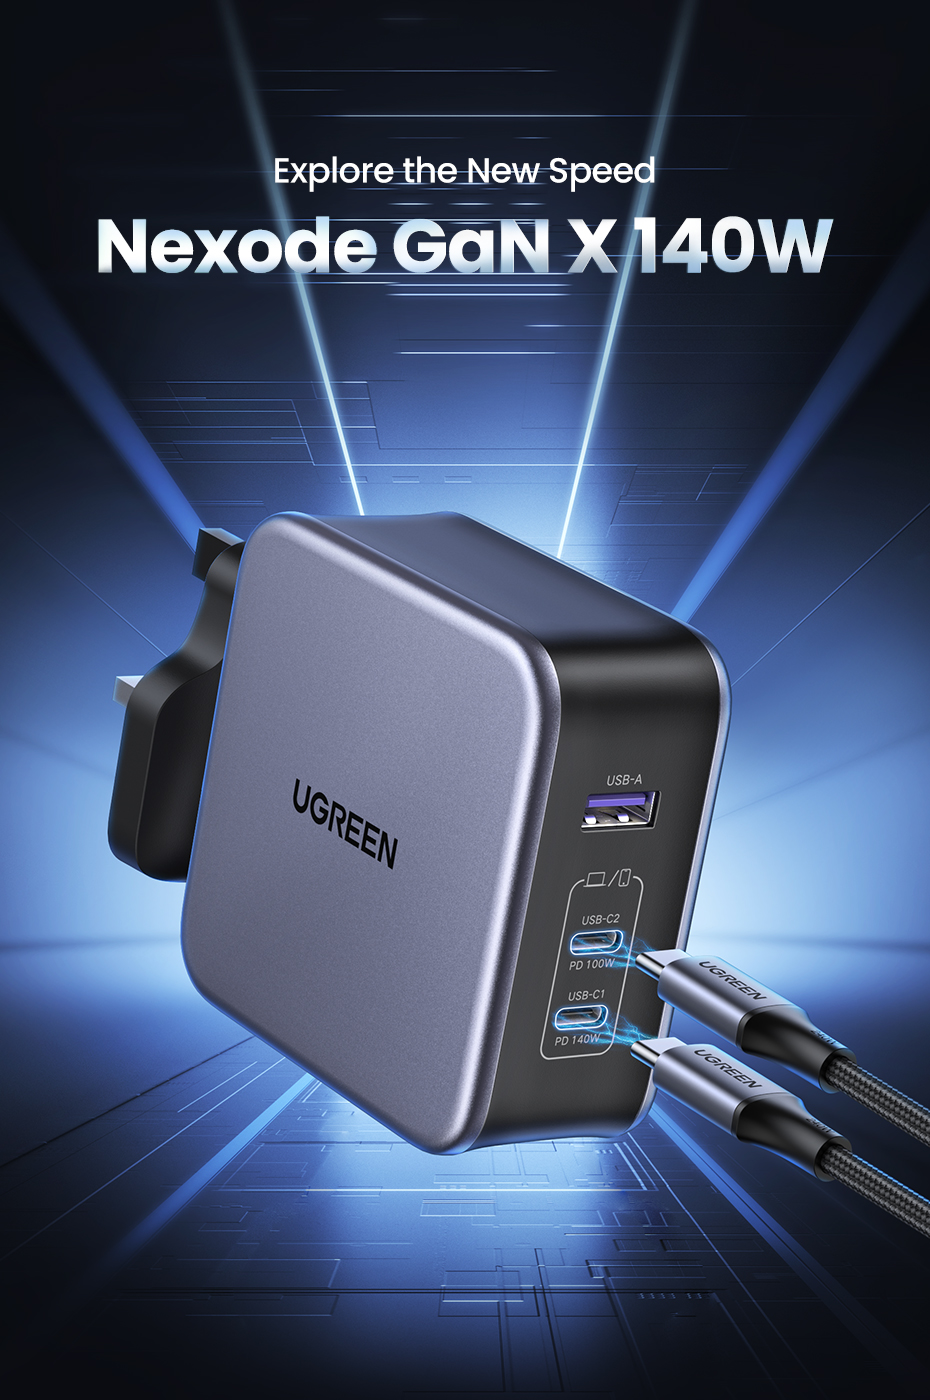  UGREEN 100W USB C Wall Charger, Nexode 2-Port GaN Foldable Fast  Charger Block Compatible with MacBook Pro/Air, iPad Pro, iPhone 14 Pro,  Dell XPS, Chromebook, Samsung Galaxy S23 Ultra, Pixel 7